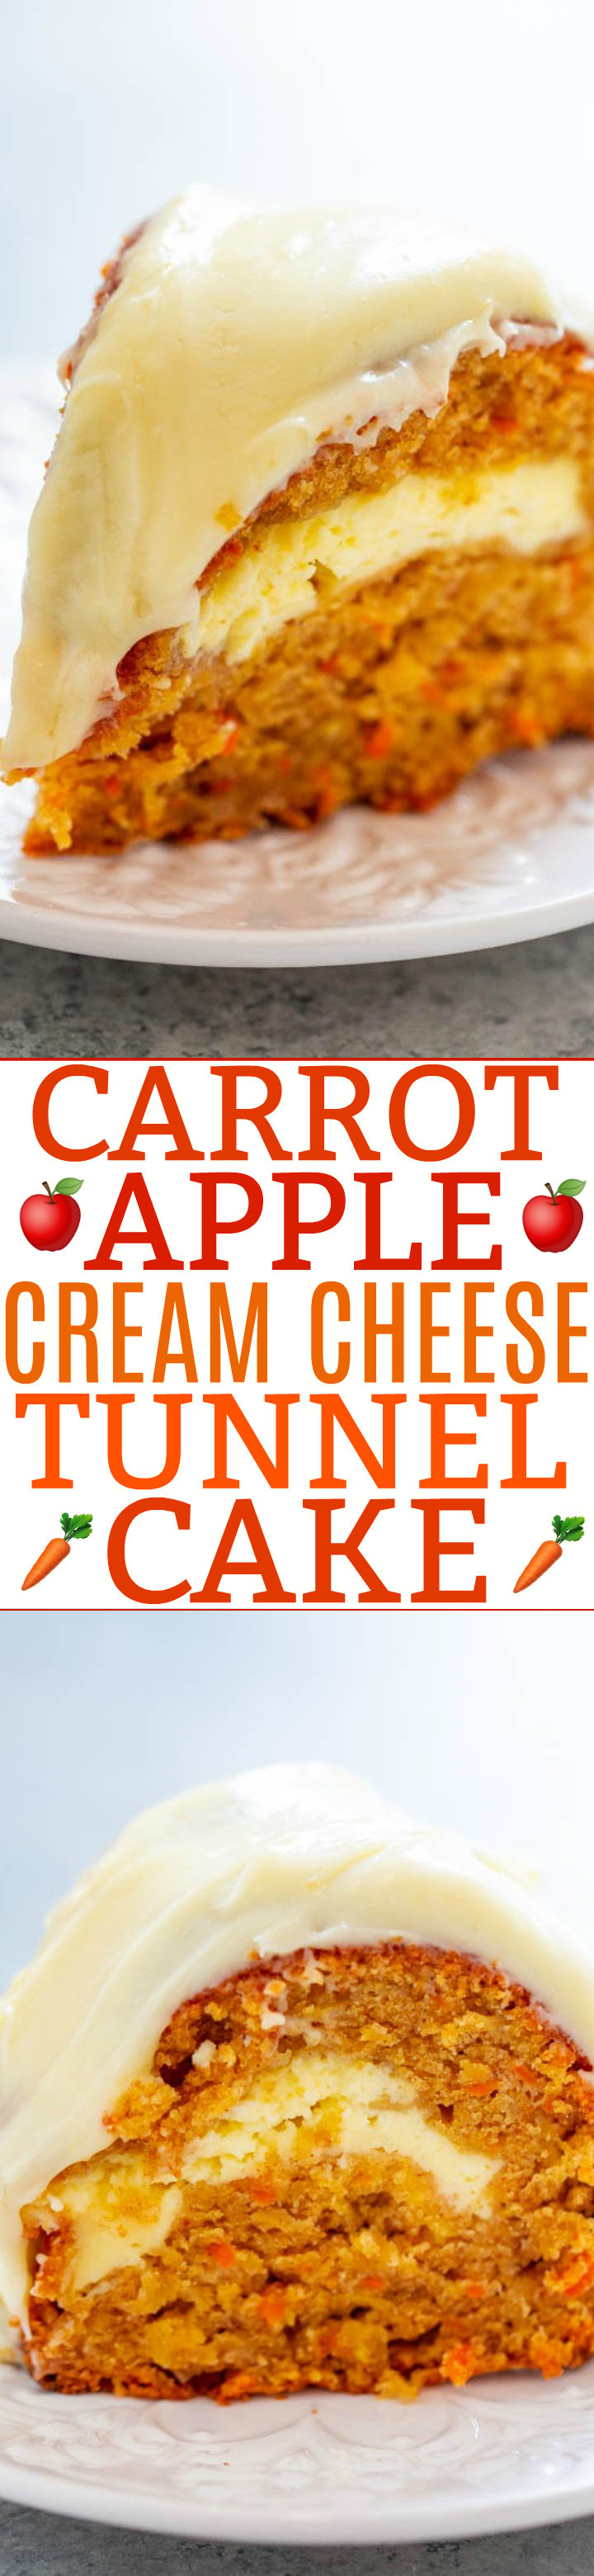 Carrot Apple Cream Cheese Cake — If you like carrot cake, you're going to LOVE this version that includes apples and a tunnel of cream cheese that runs through the center!! EASY, amazing, and a MUST-MAKE!!